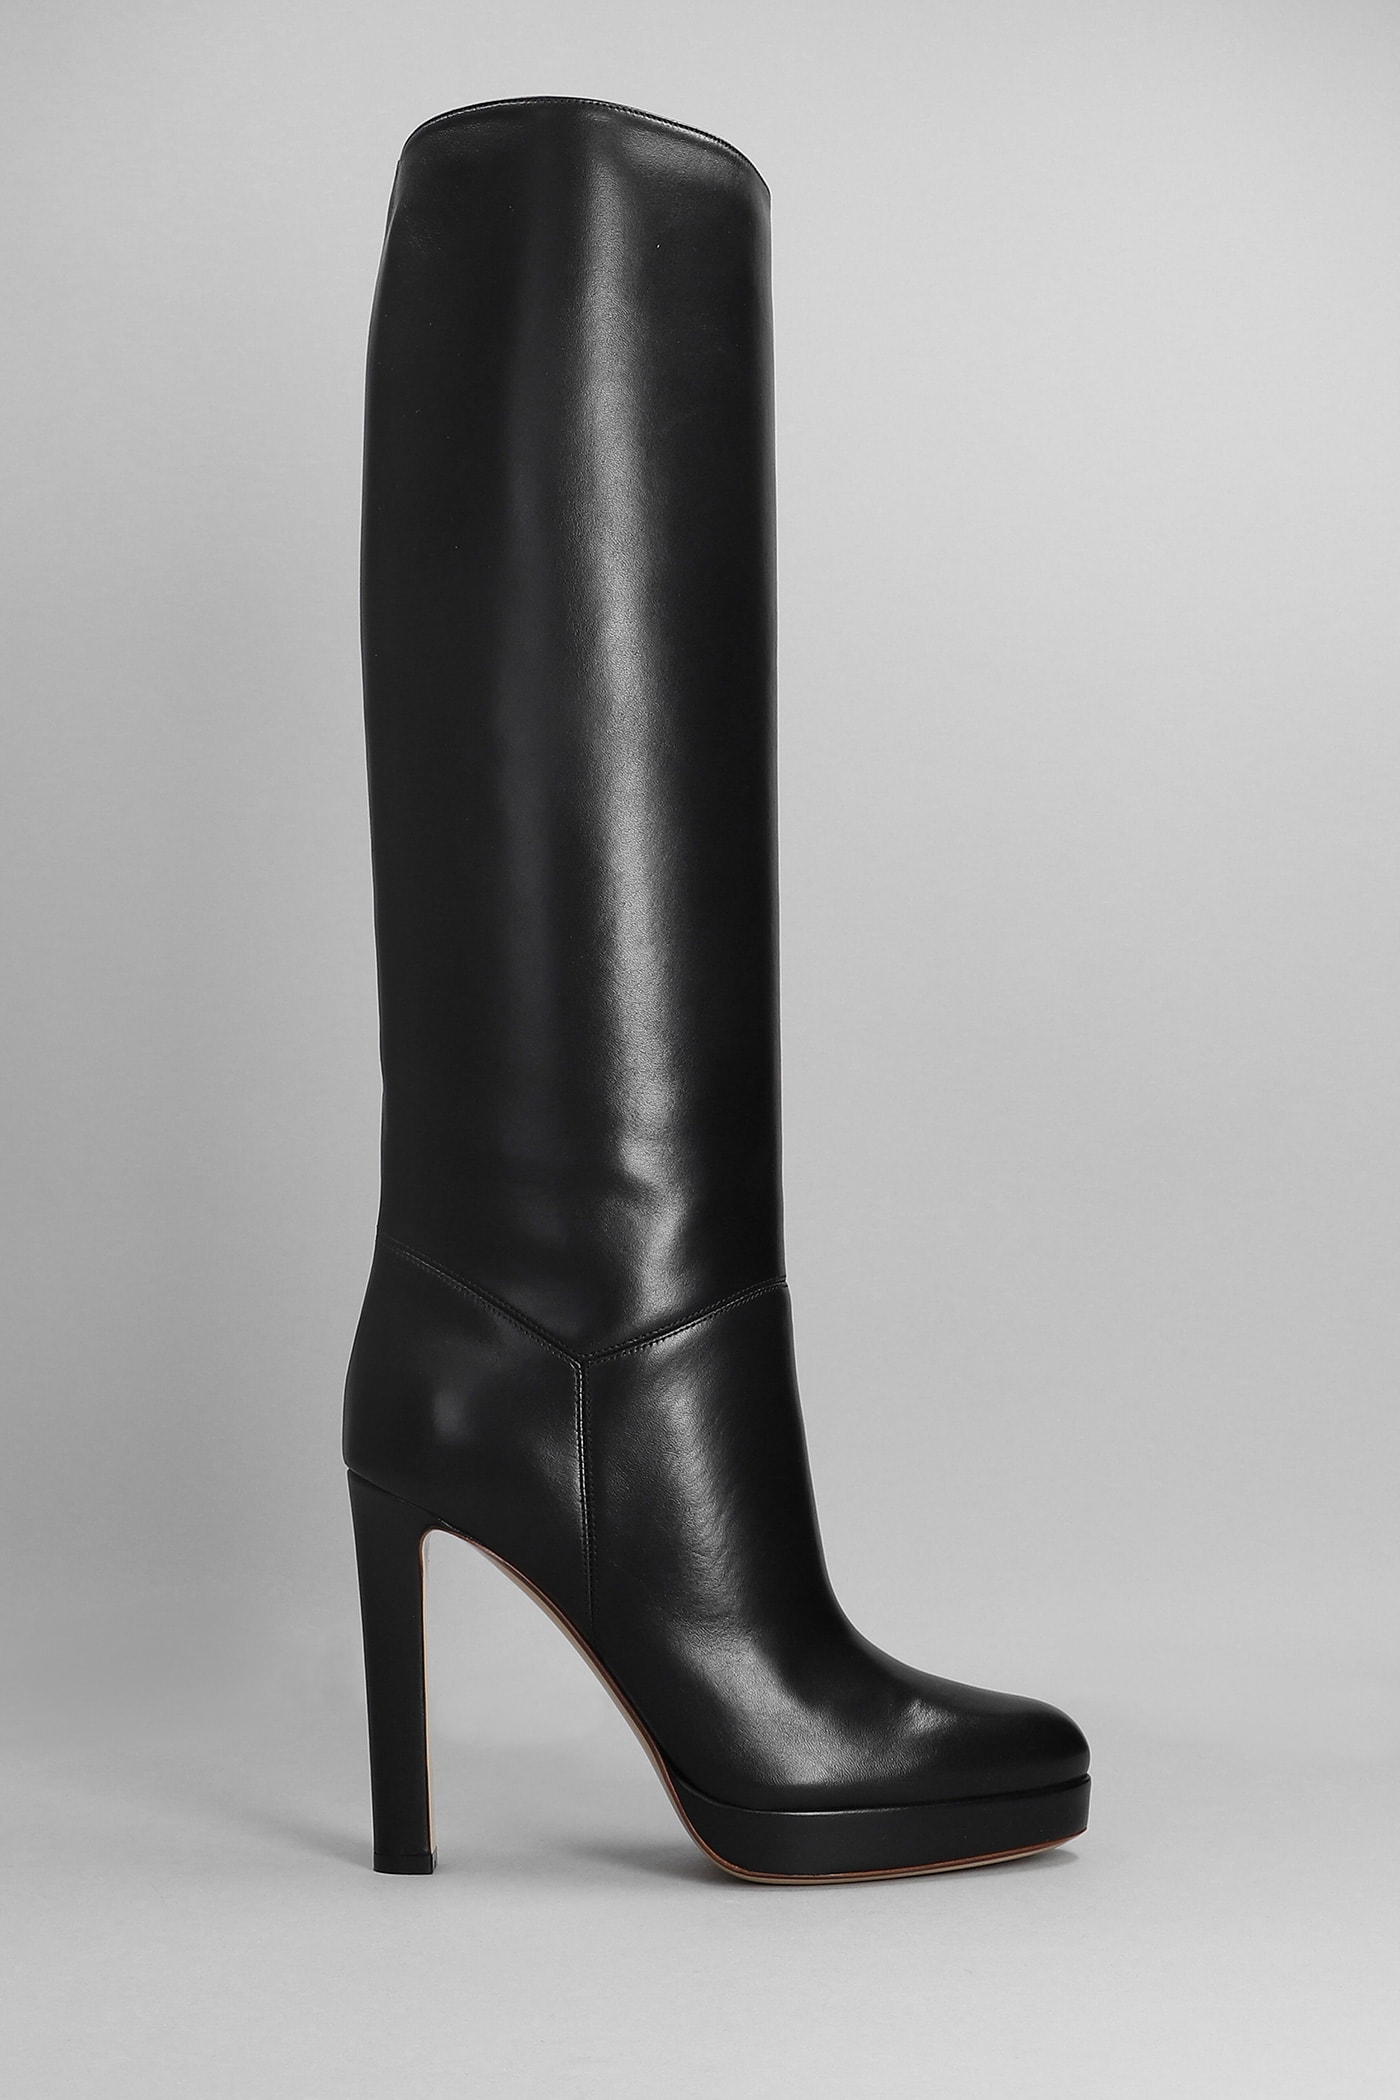 Francesco Russo High Heels Boots In Black Leather